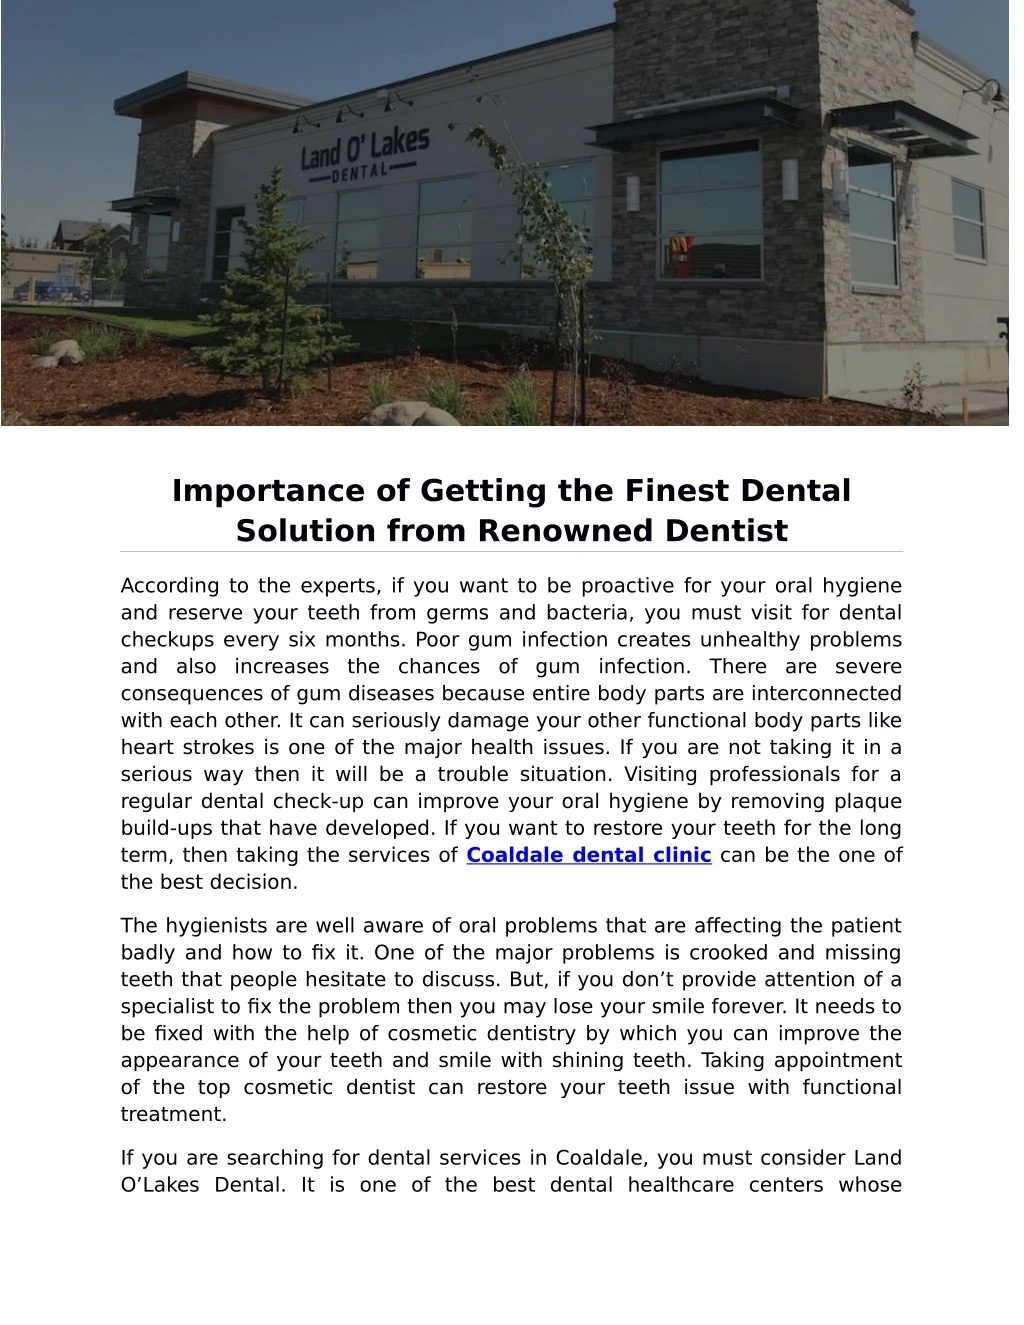 importance of getting the finest dental solution